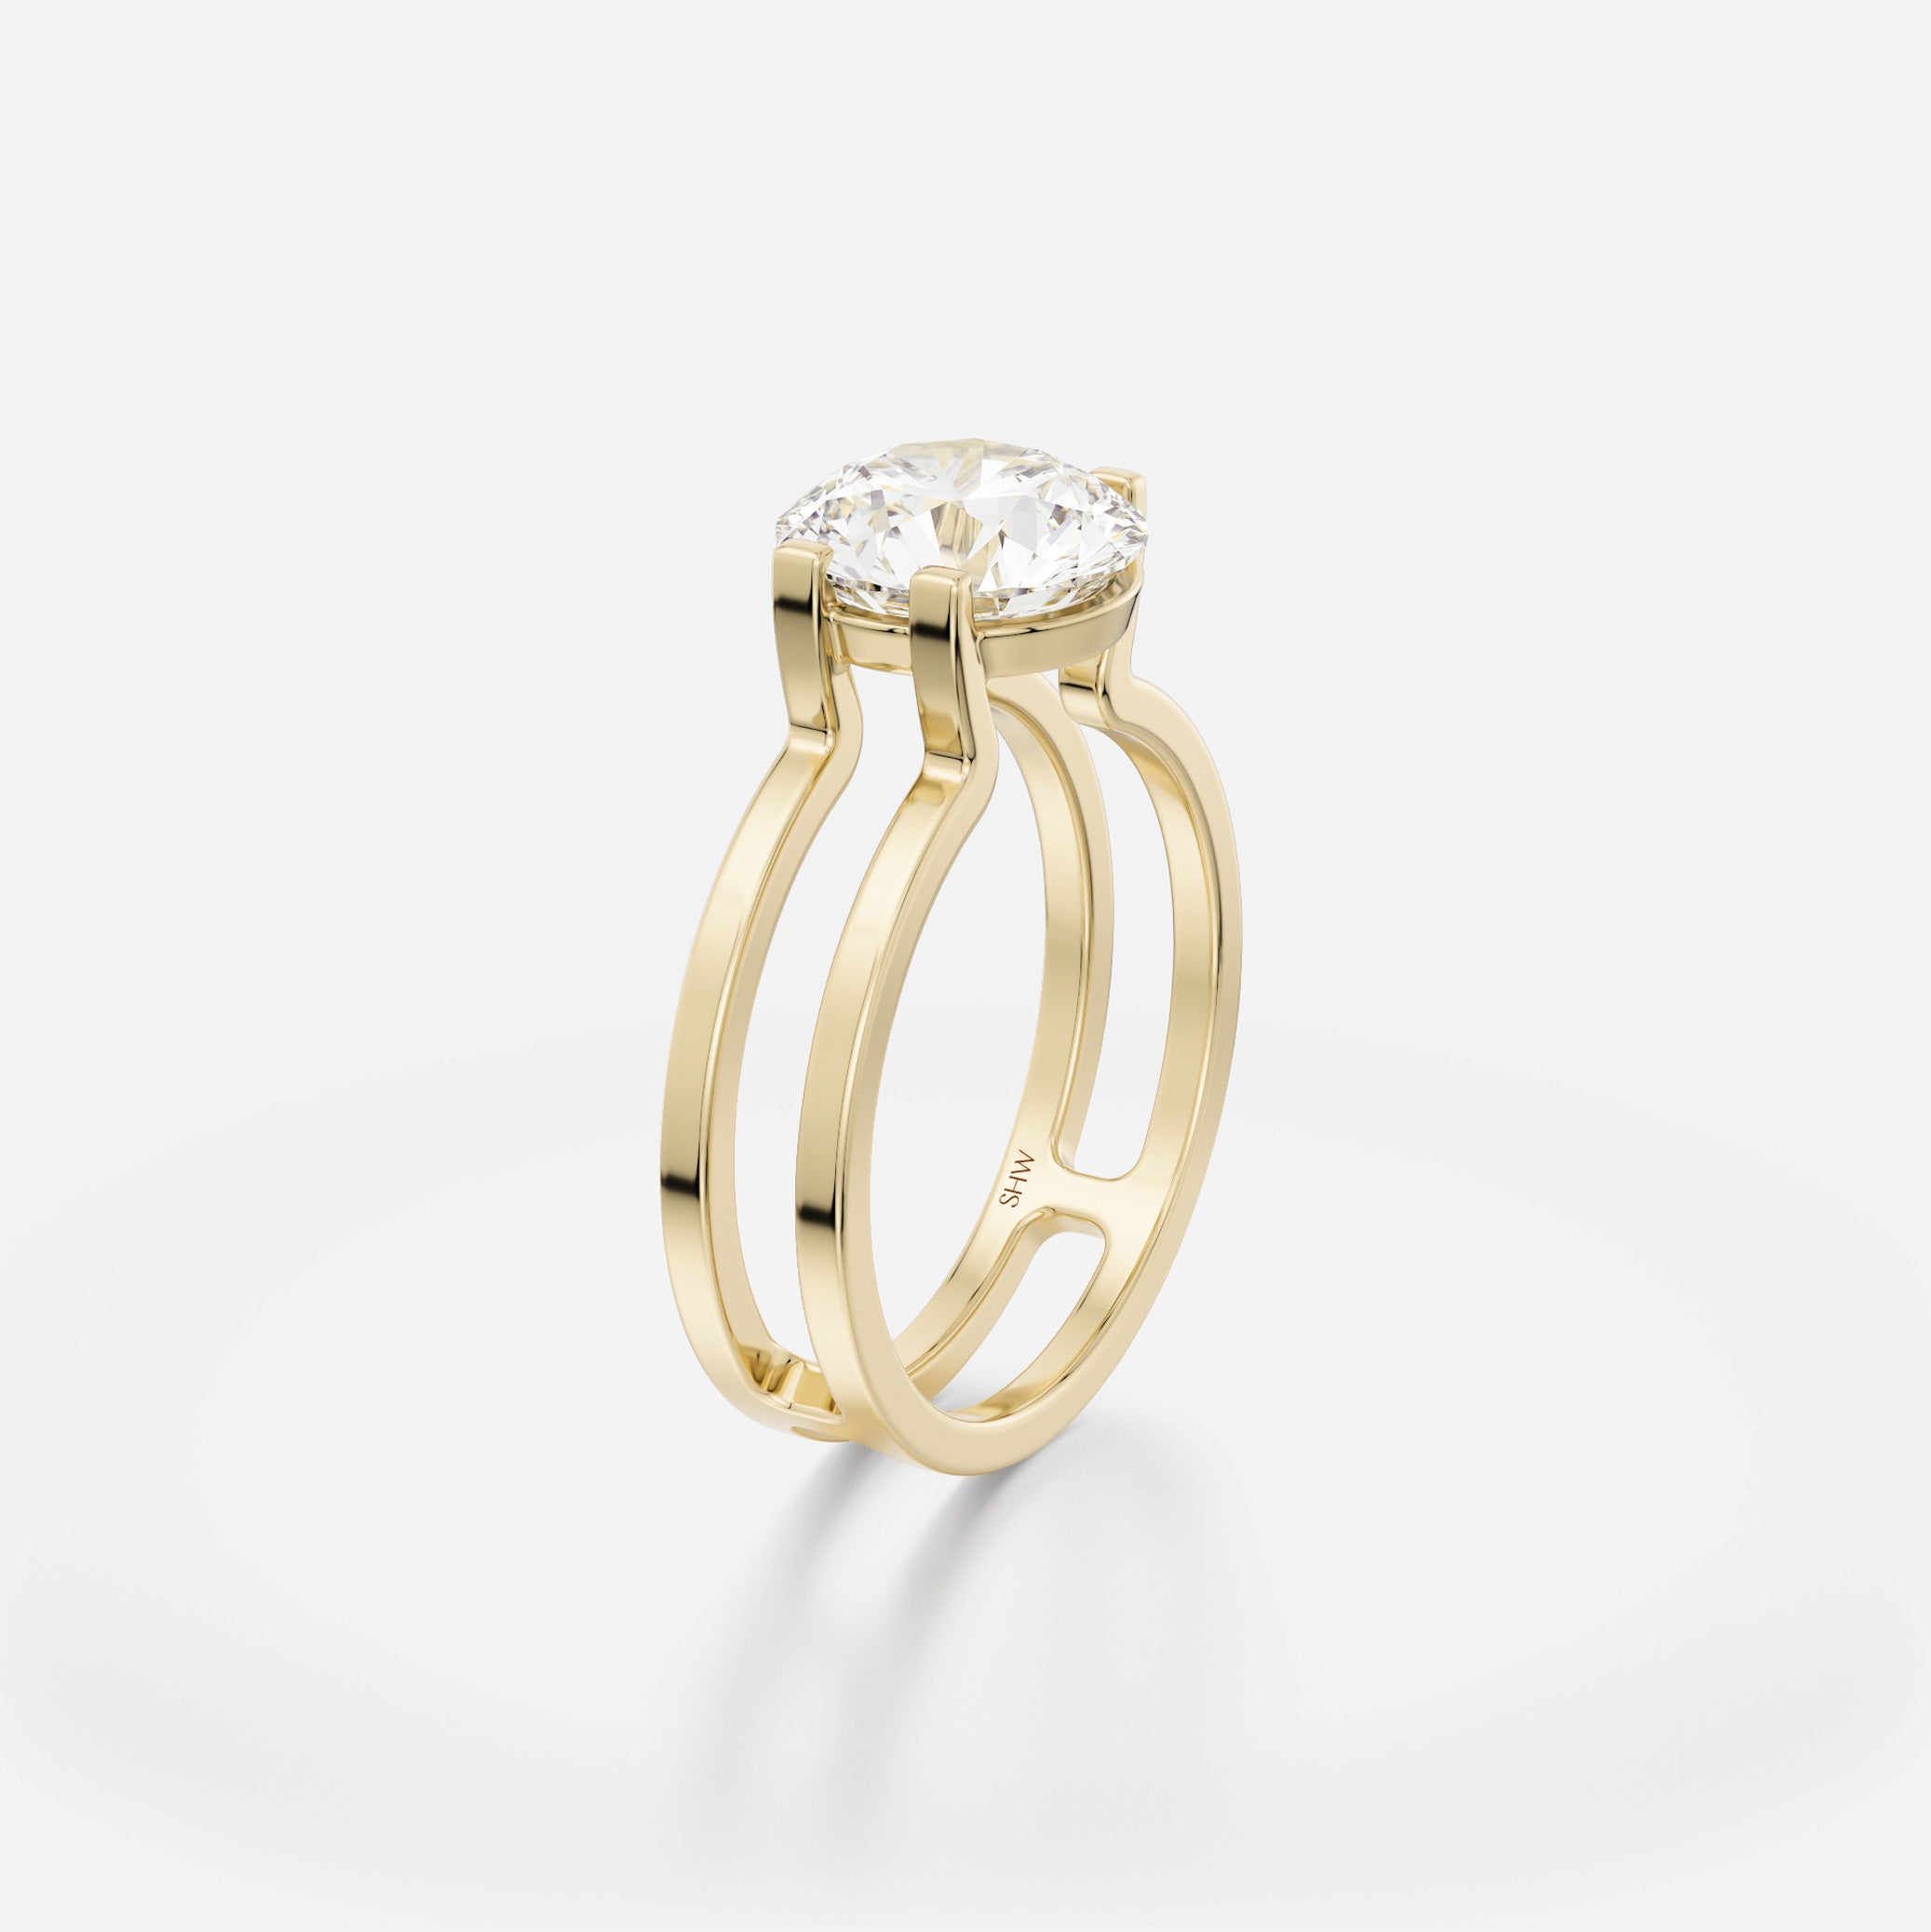 Mes Double Band Round Simple Engagement Ring Setting in Sustainable 14k Gold or platinum handmade by SHW Fine Jewelry NYC